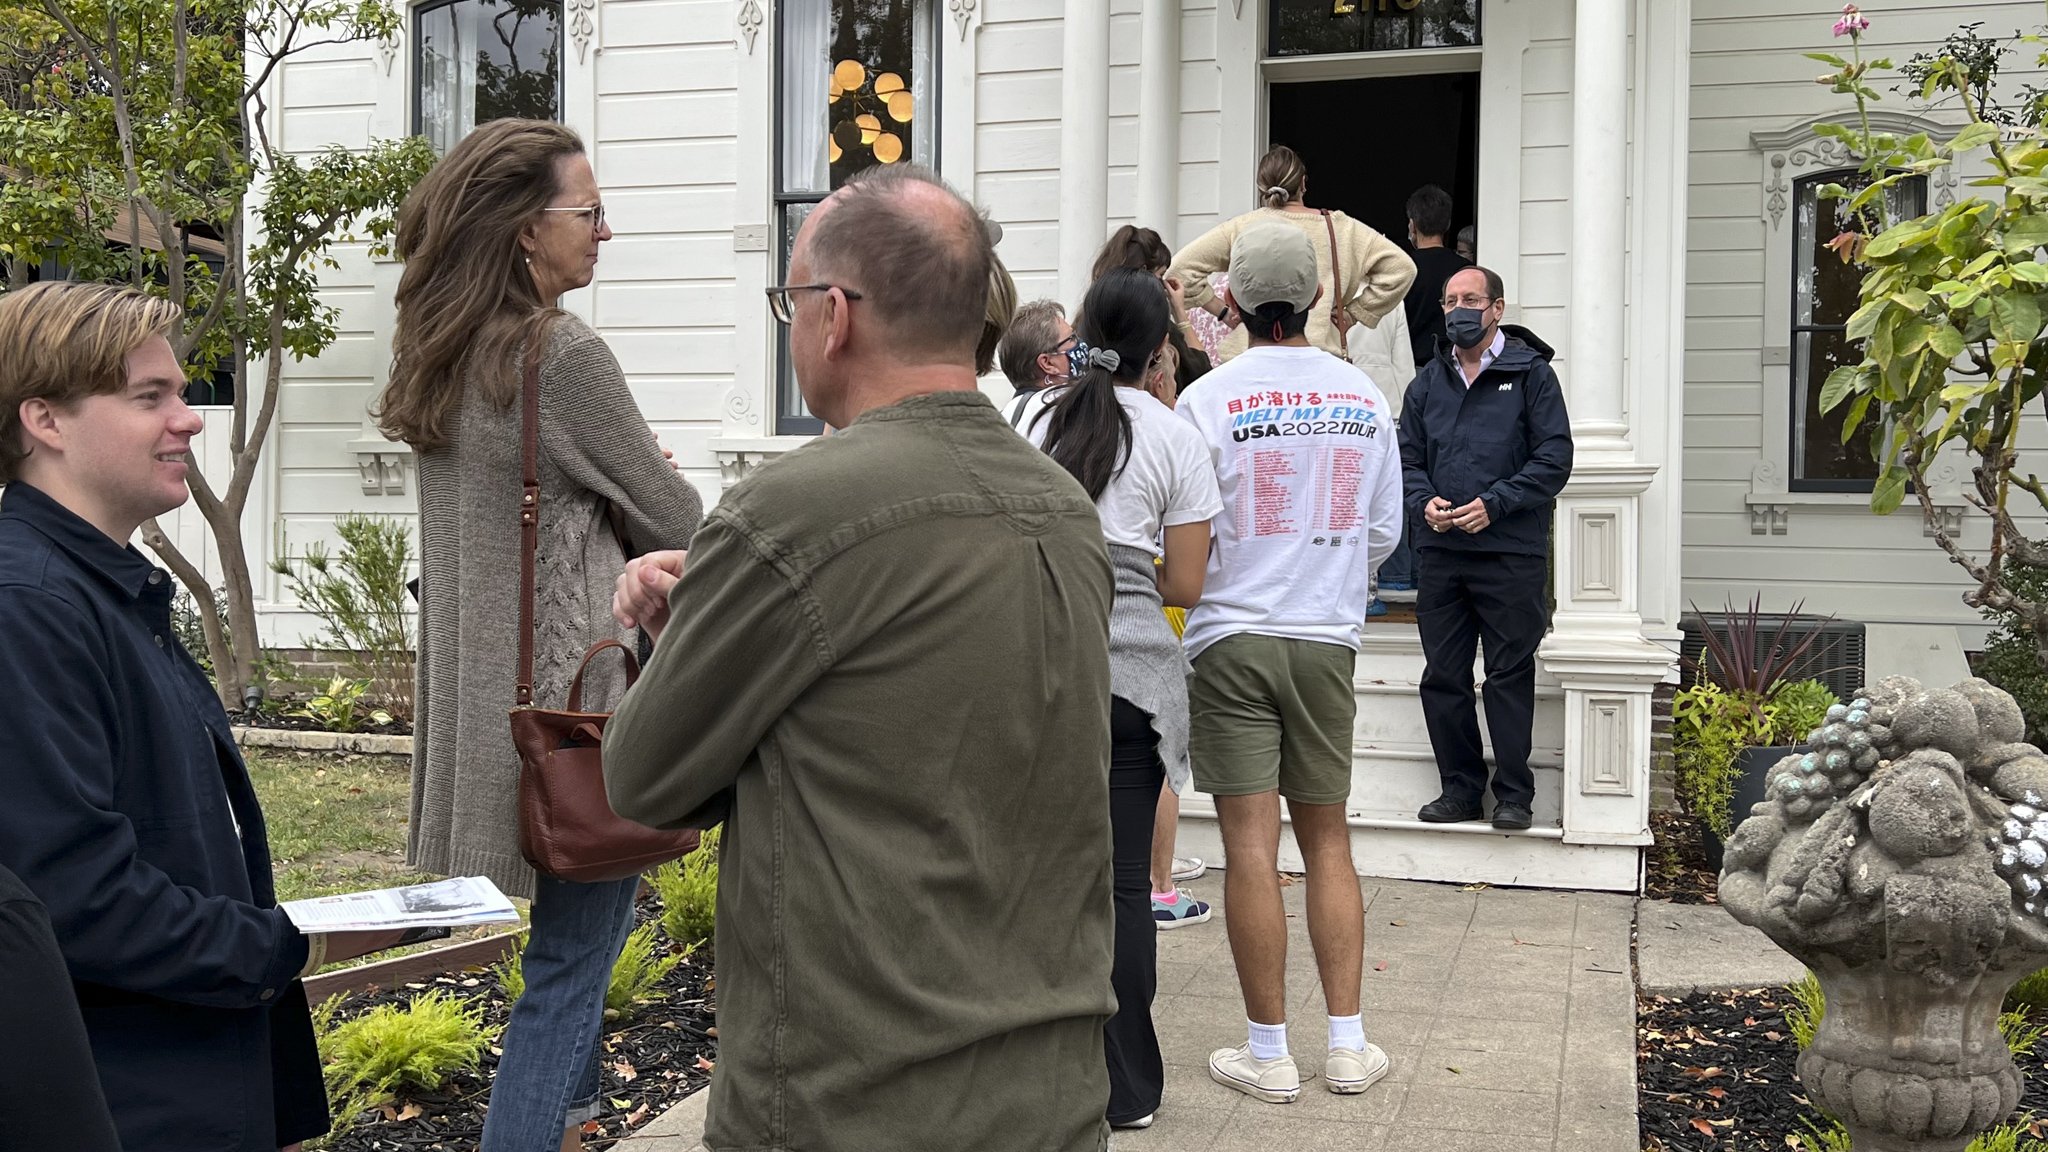 2022 Home Tour - People Lined Up Outside of Stevens House 4.jpg